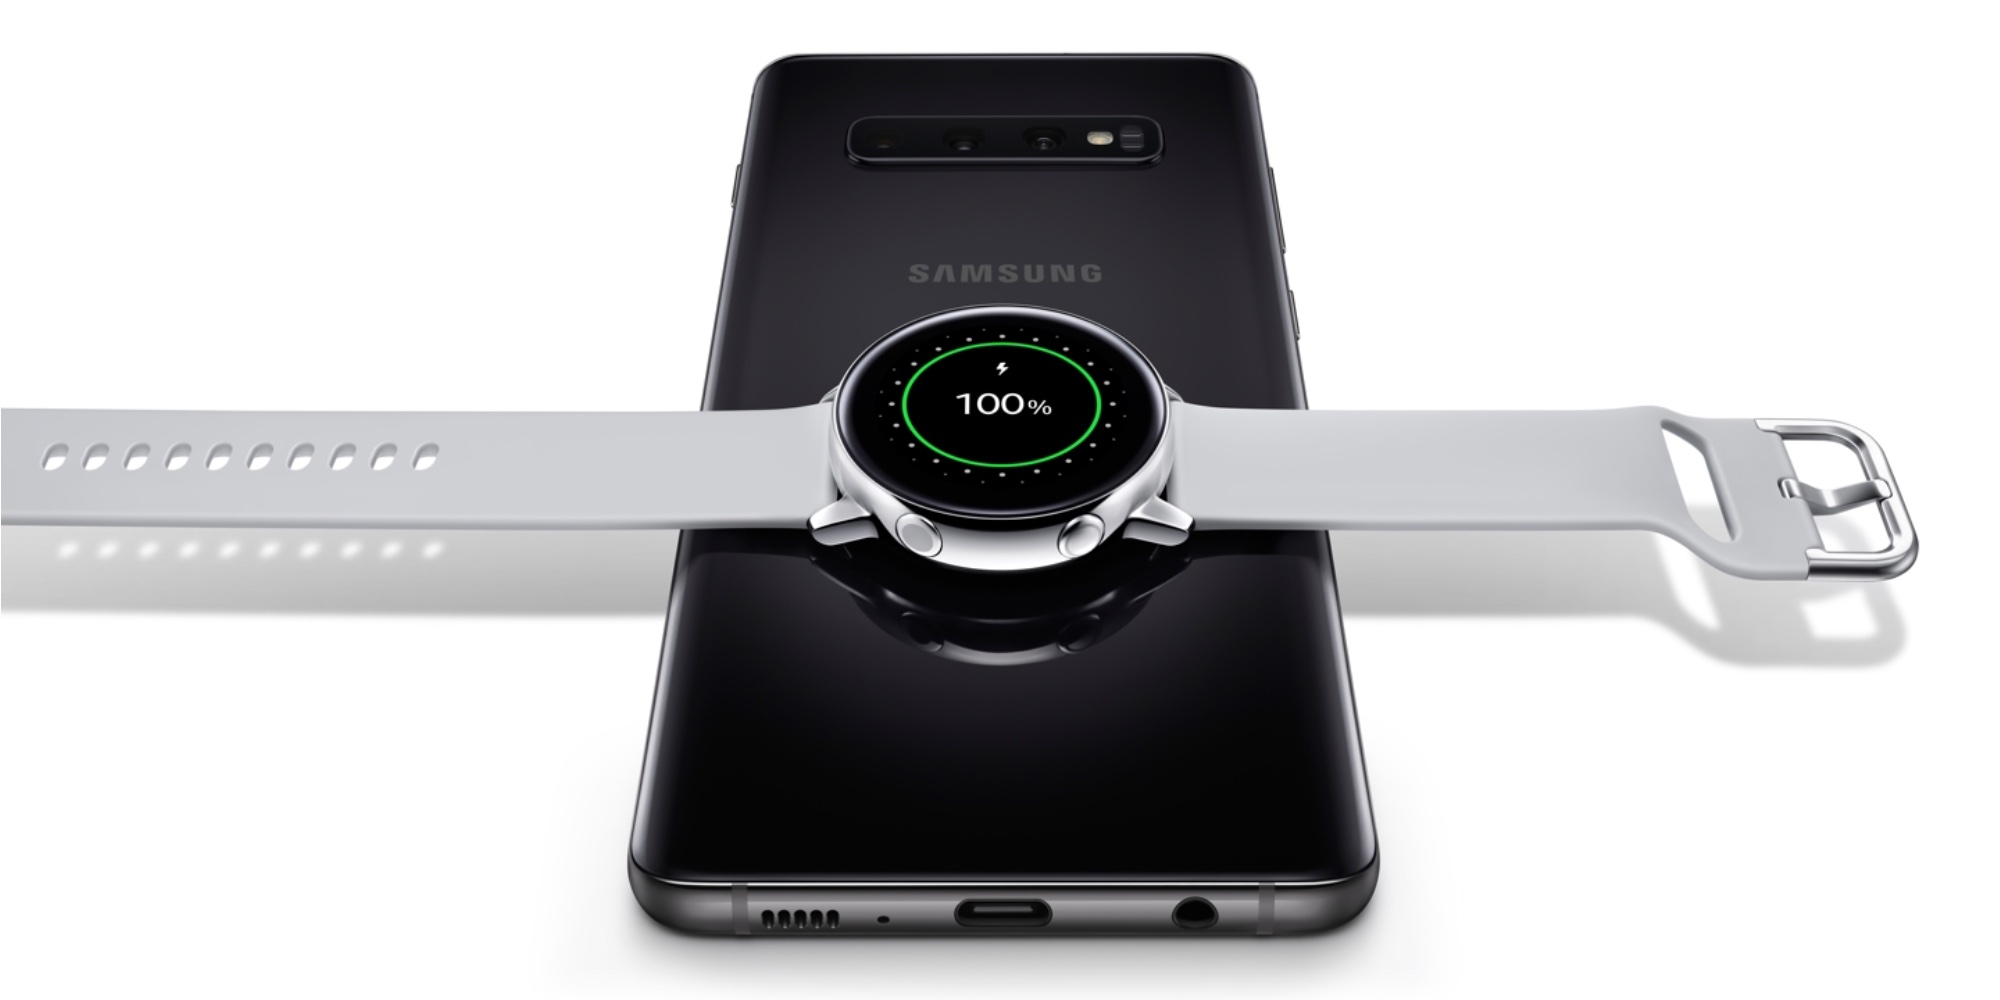 Samsung&#39;s Galaxy Watch Active beats Black Friday pricing at $149 (Save 25%) - 9to5Toys